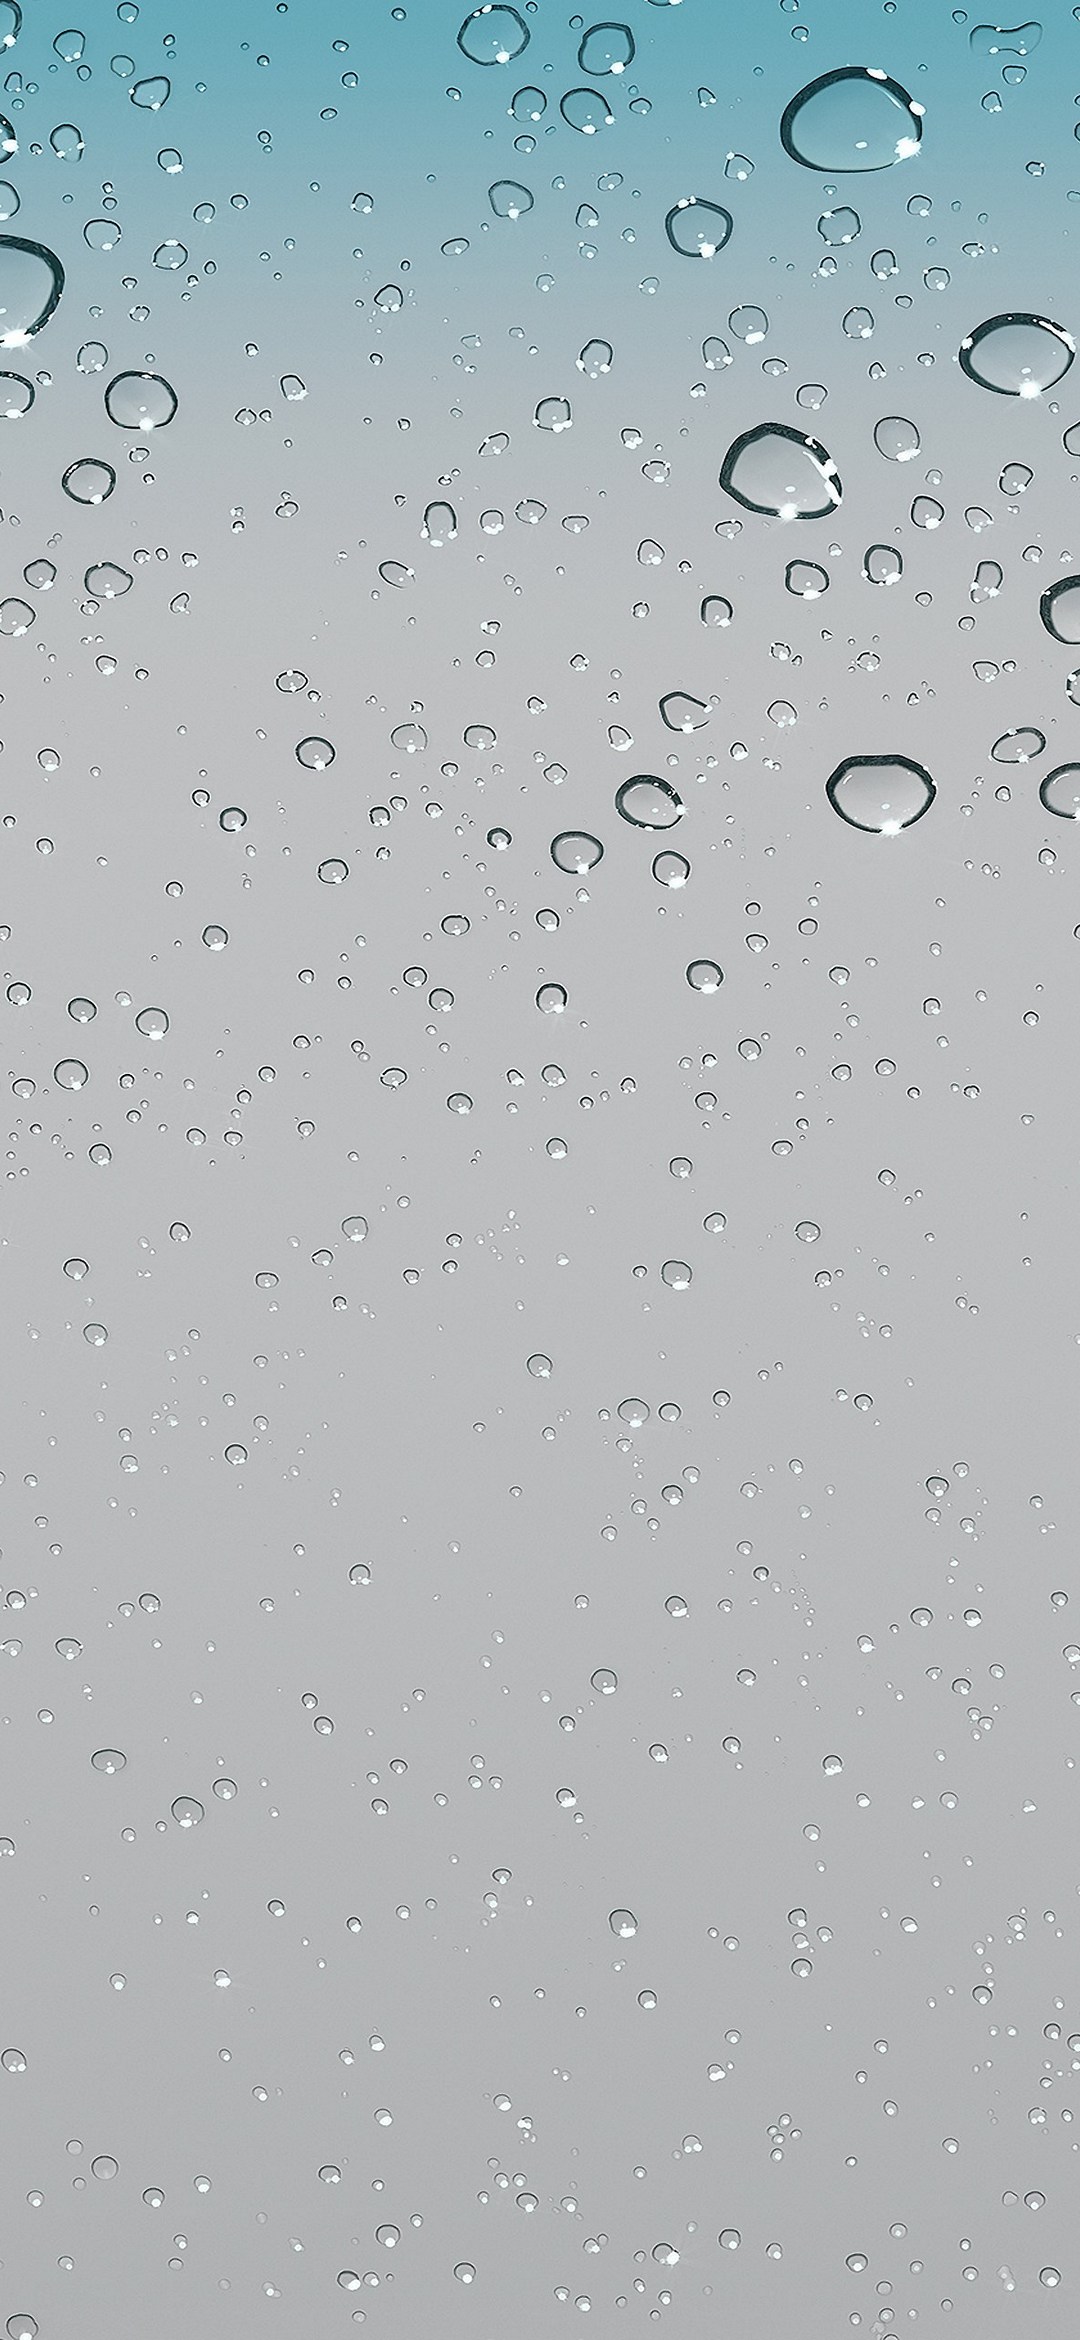 Beautiful Glass Surface With Water Drops Oppo Reno A Android スマホ壁紙 待ち受け スマラン